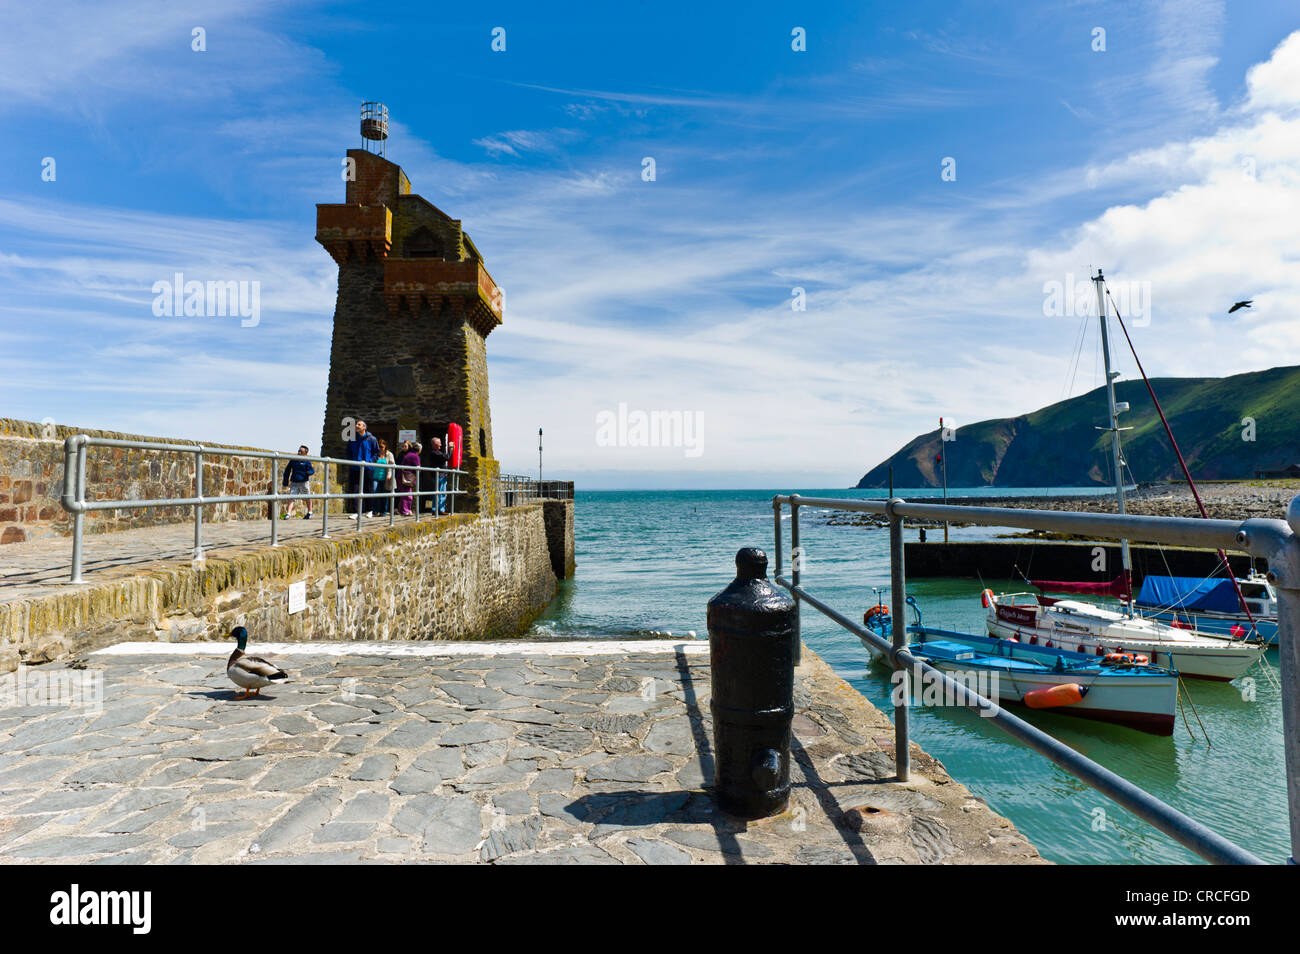 The Rhenish tower on the harbour wall at Lynmouth. Stock Photo